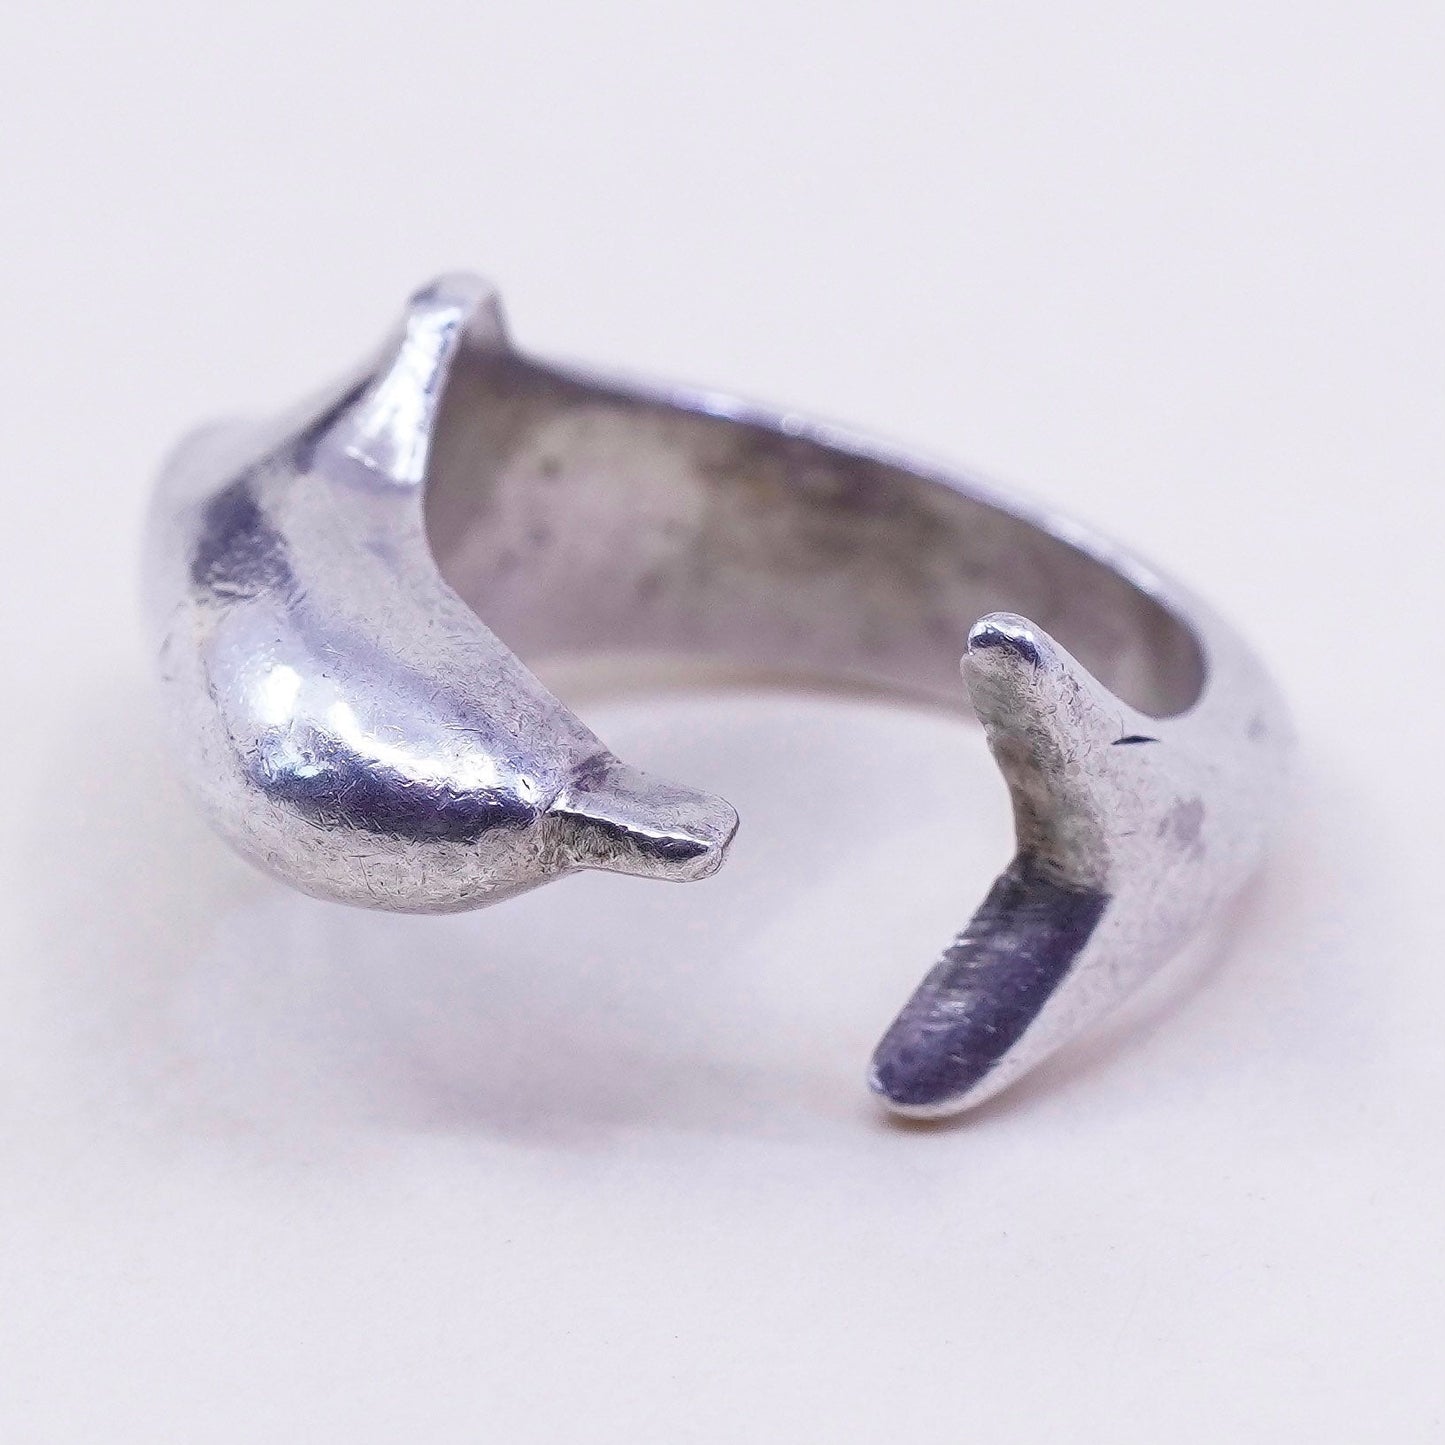 Size 3.75, Vintage Mexico sterling silver ring, wrap 925 handmade dolphin band